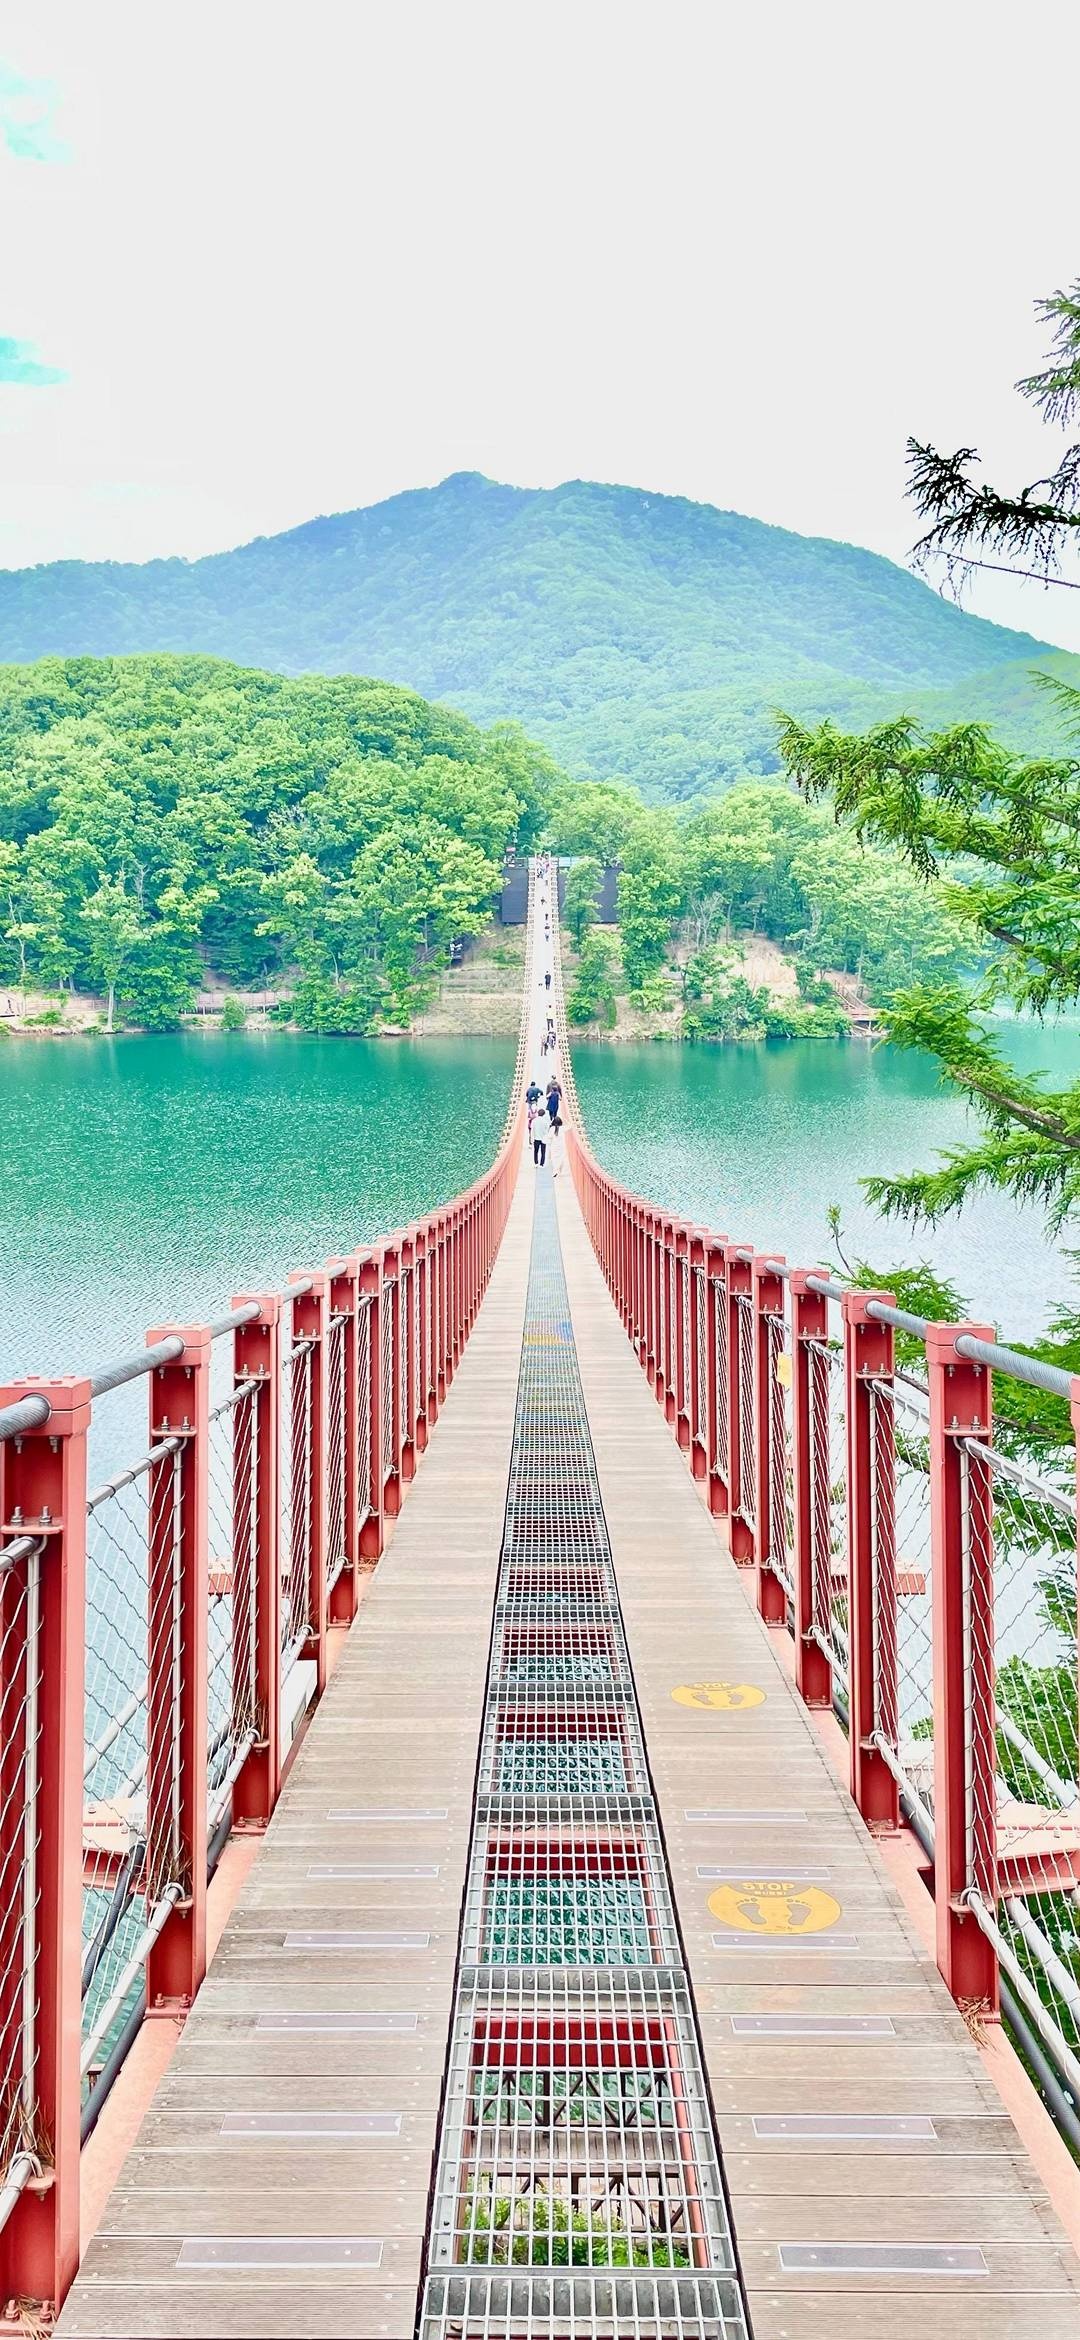 Bridge: A walkway chain suspension span in South Korea, A popular place for tourists. 1080x2340 HD Wallpaper.